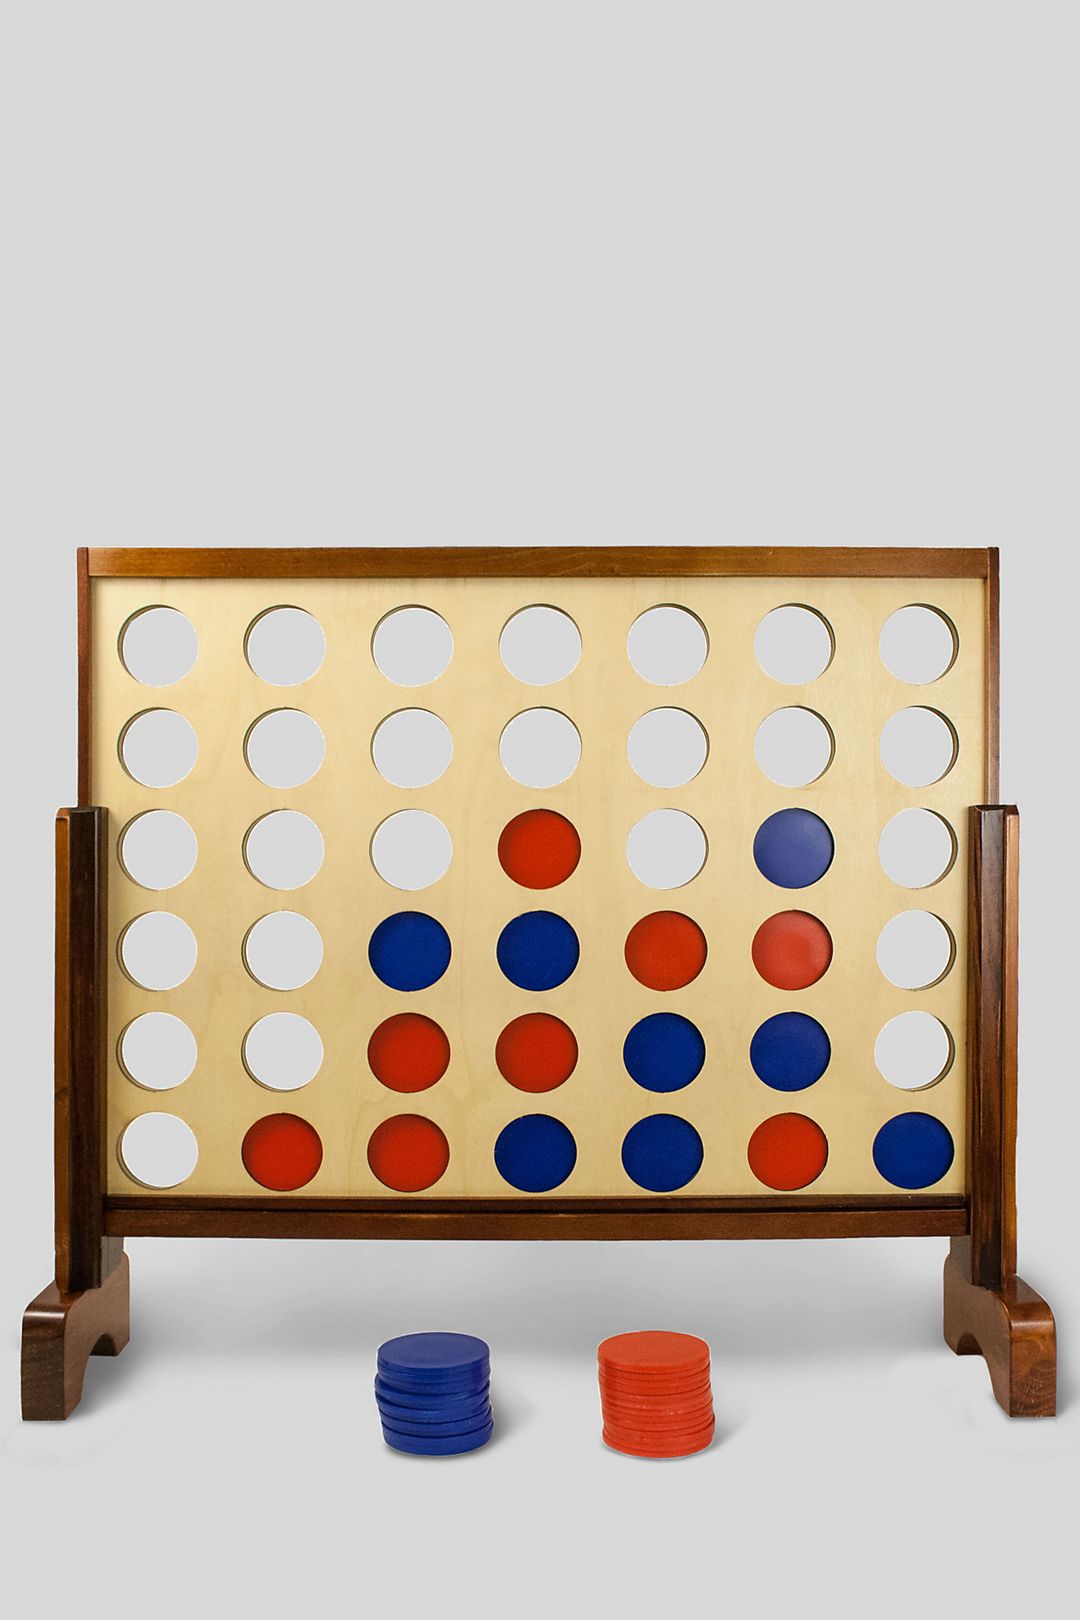 Giant Connecting Checkers Yard Game Image 1